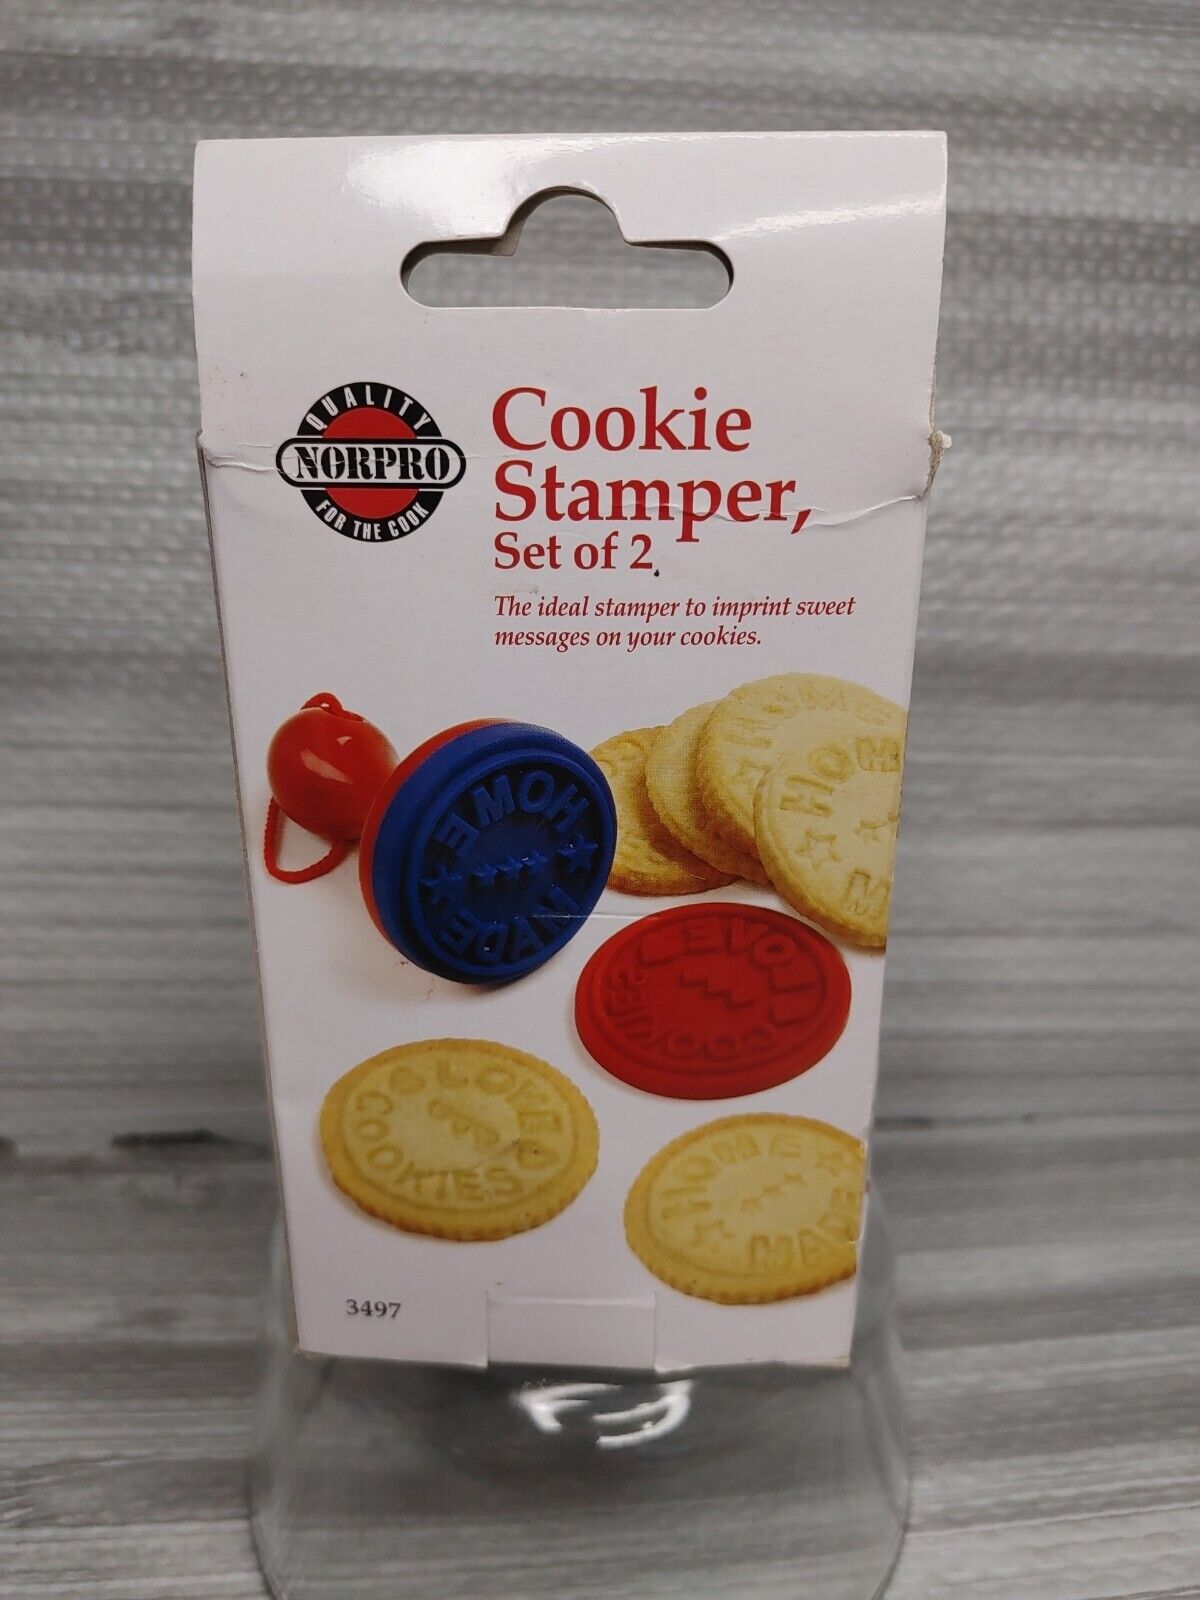 Norpro Silicone Cookie Stamper Love Cookies Home Made Set of 2.     Open Box